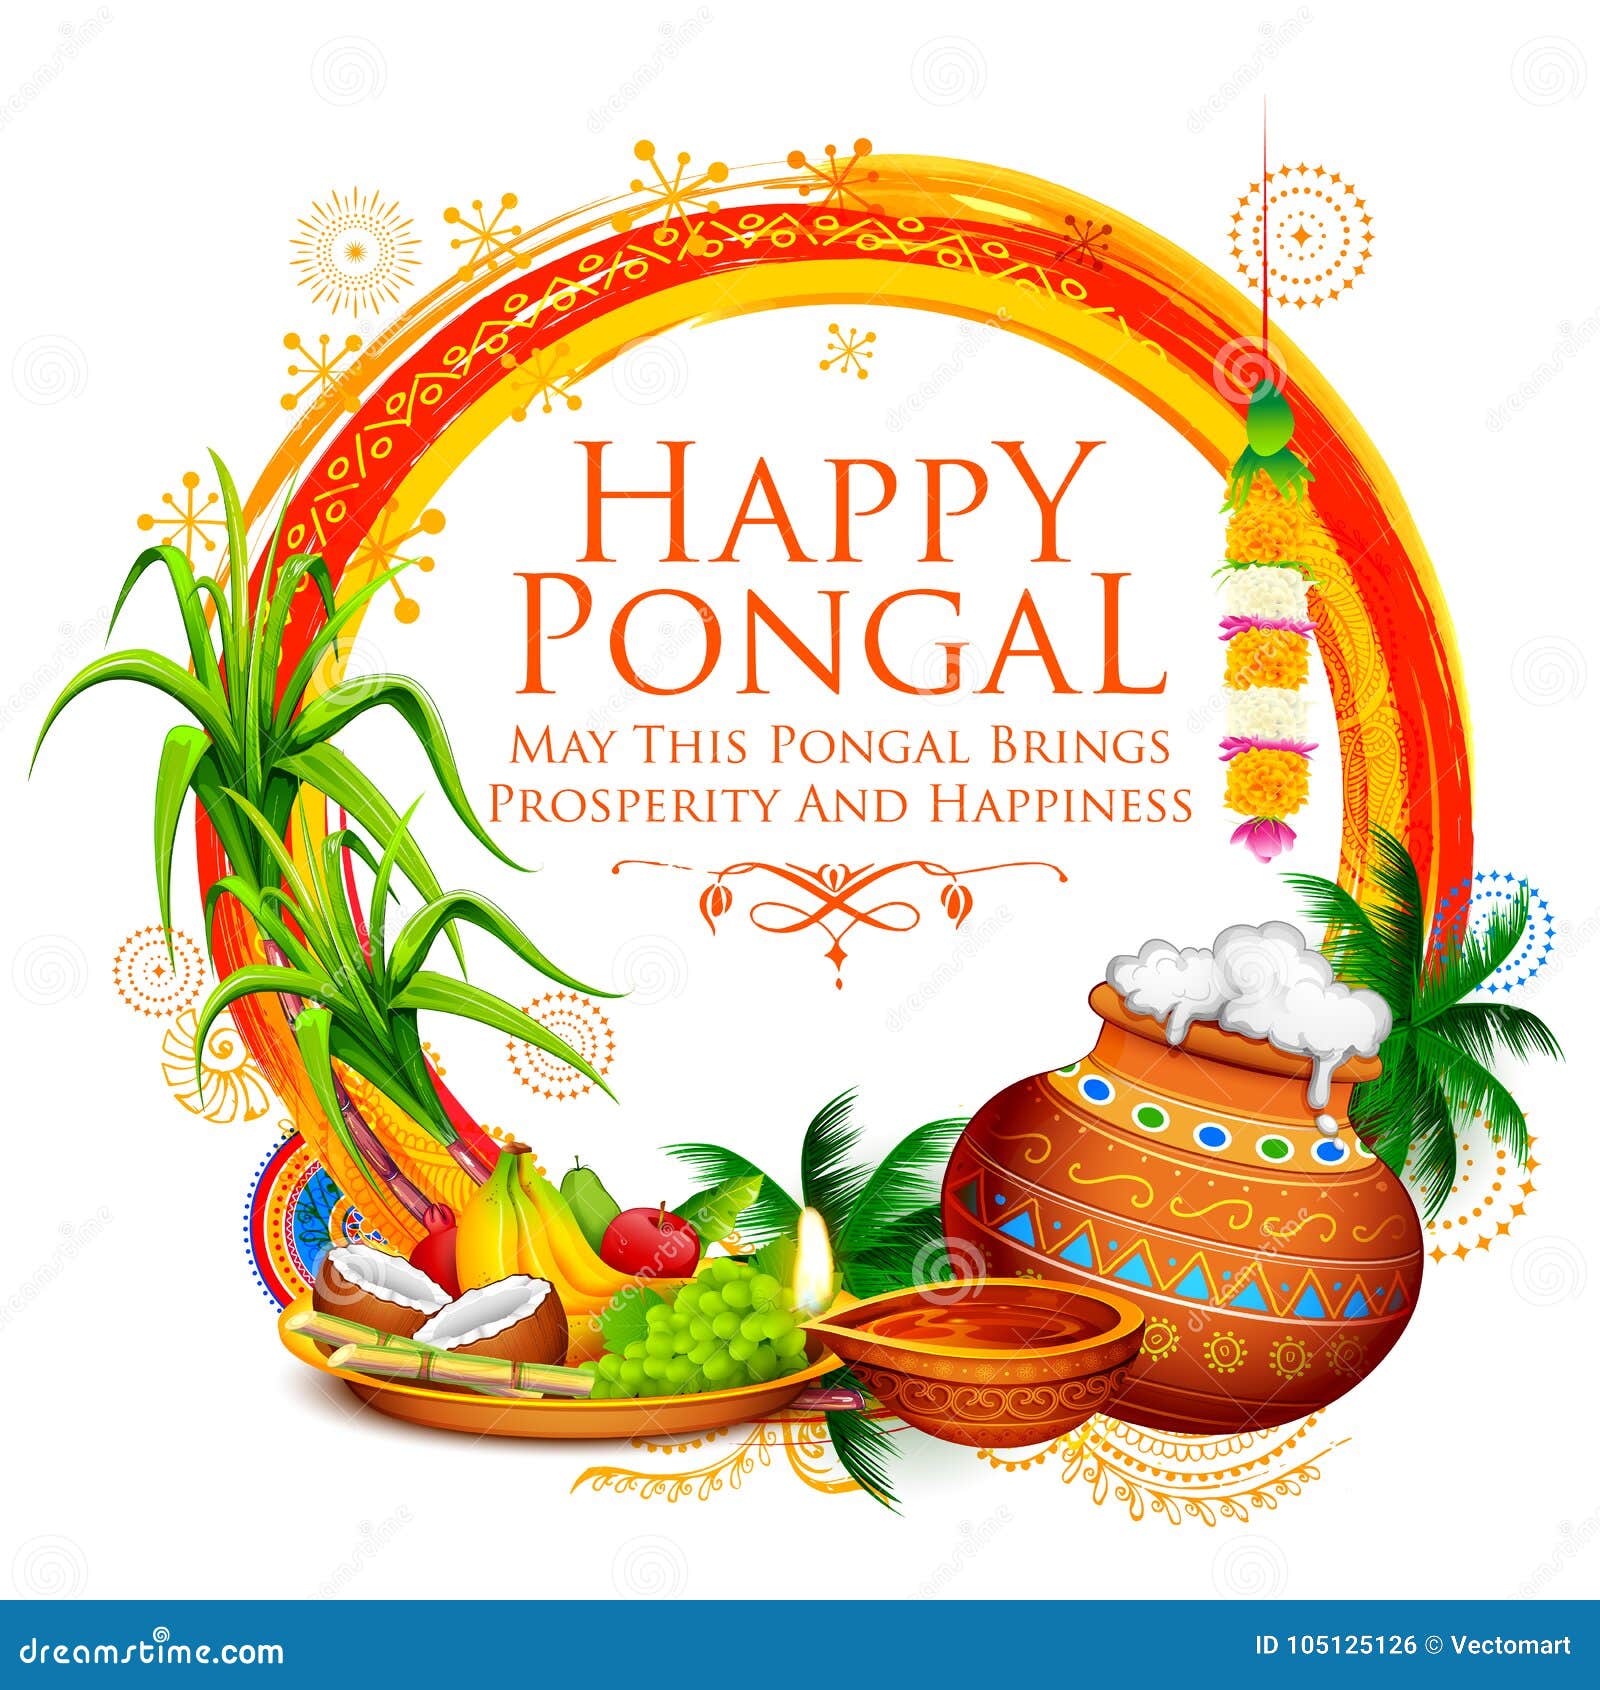 Happy Pongal Holiday Harvest Festival of Tamil Nadu South India ...